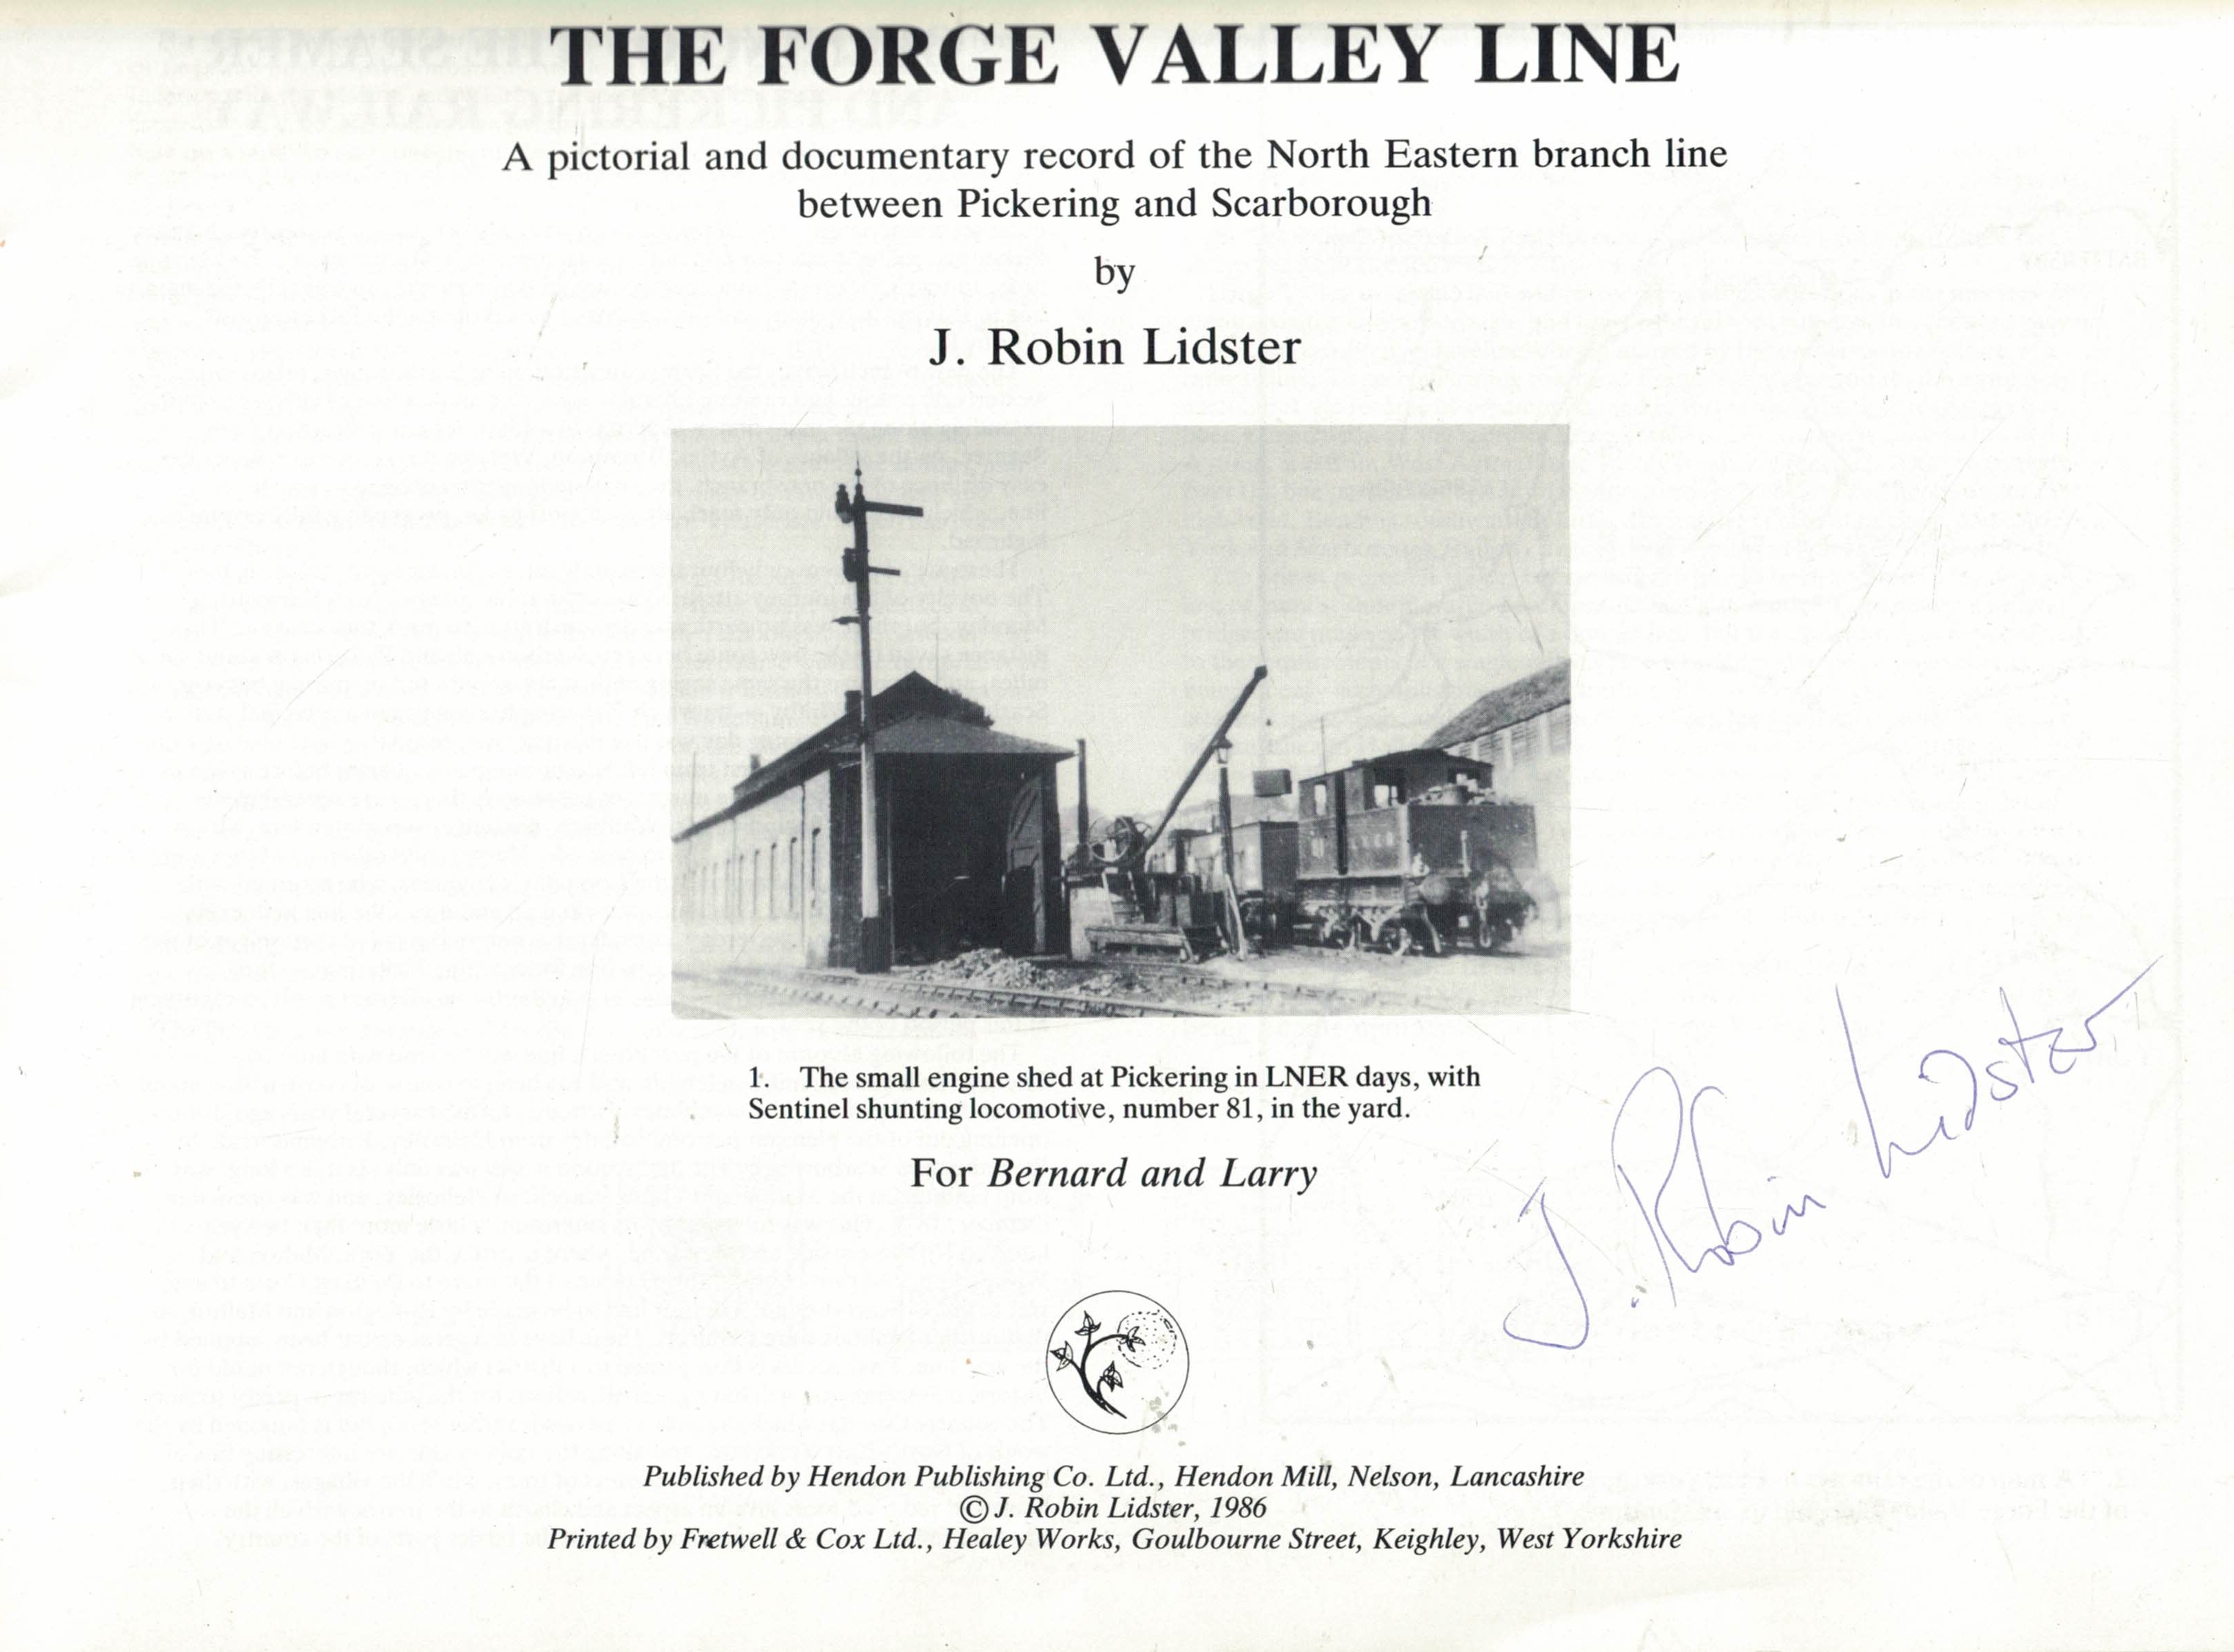 The Forge Valley Line. A Railway Between Pickering and Scarborough. Signed copy.